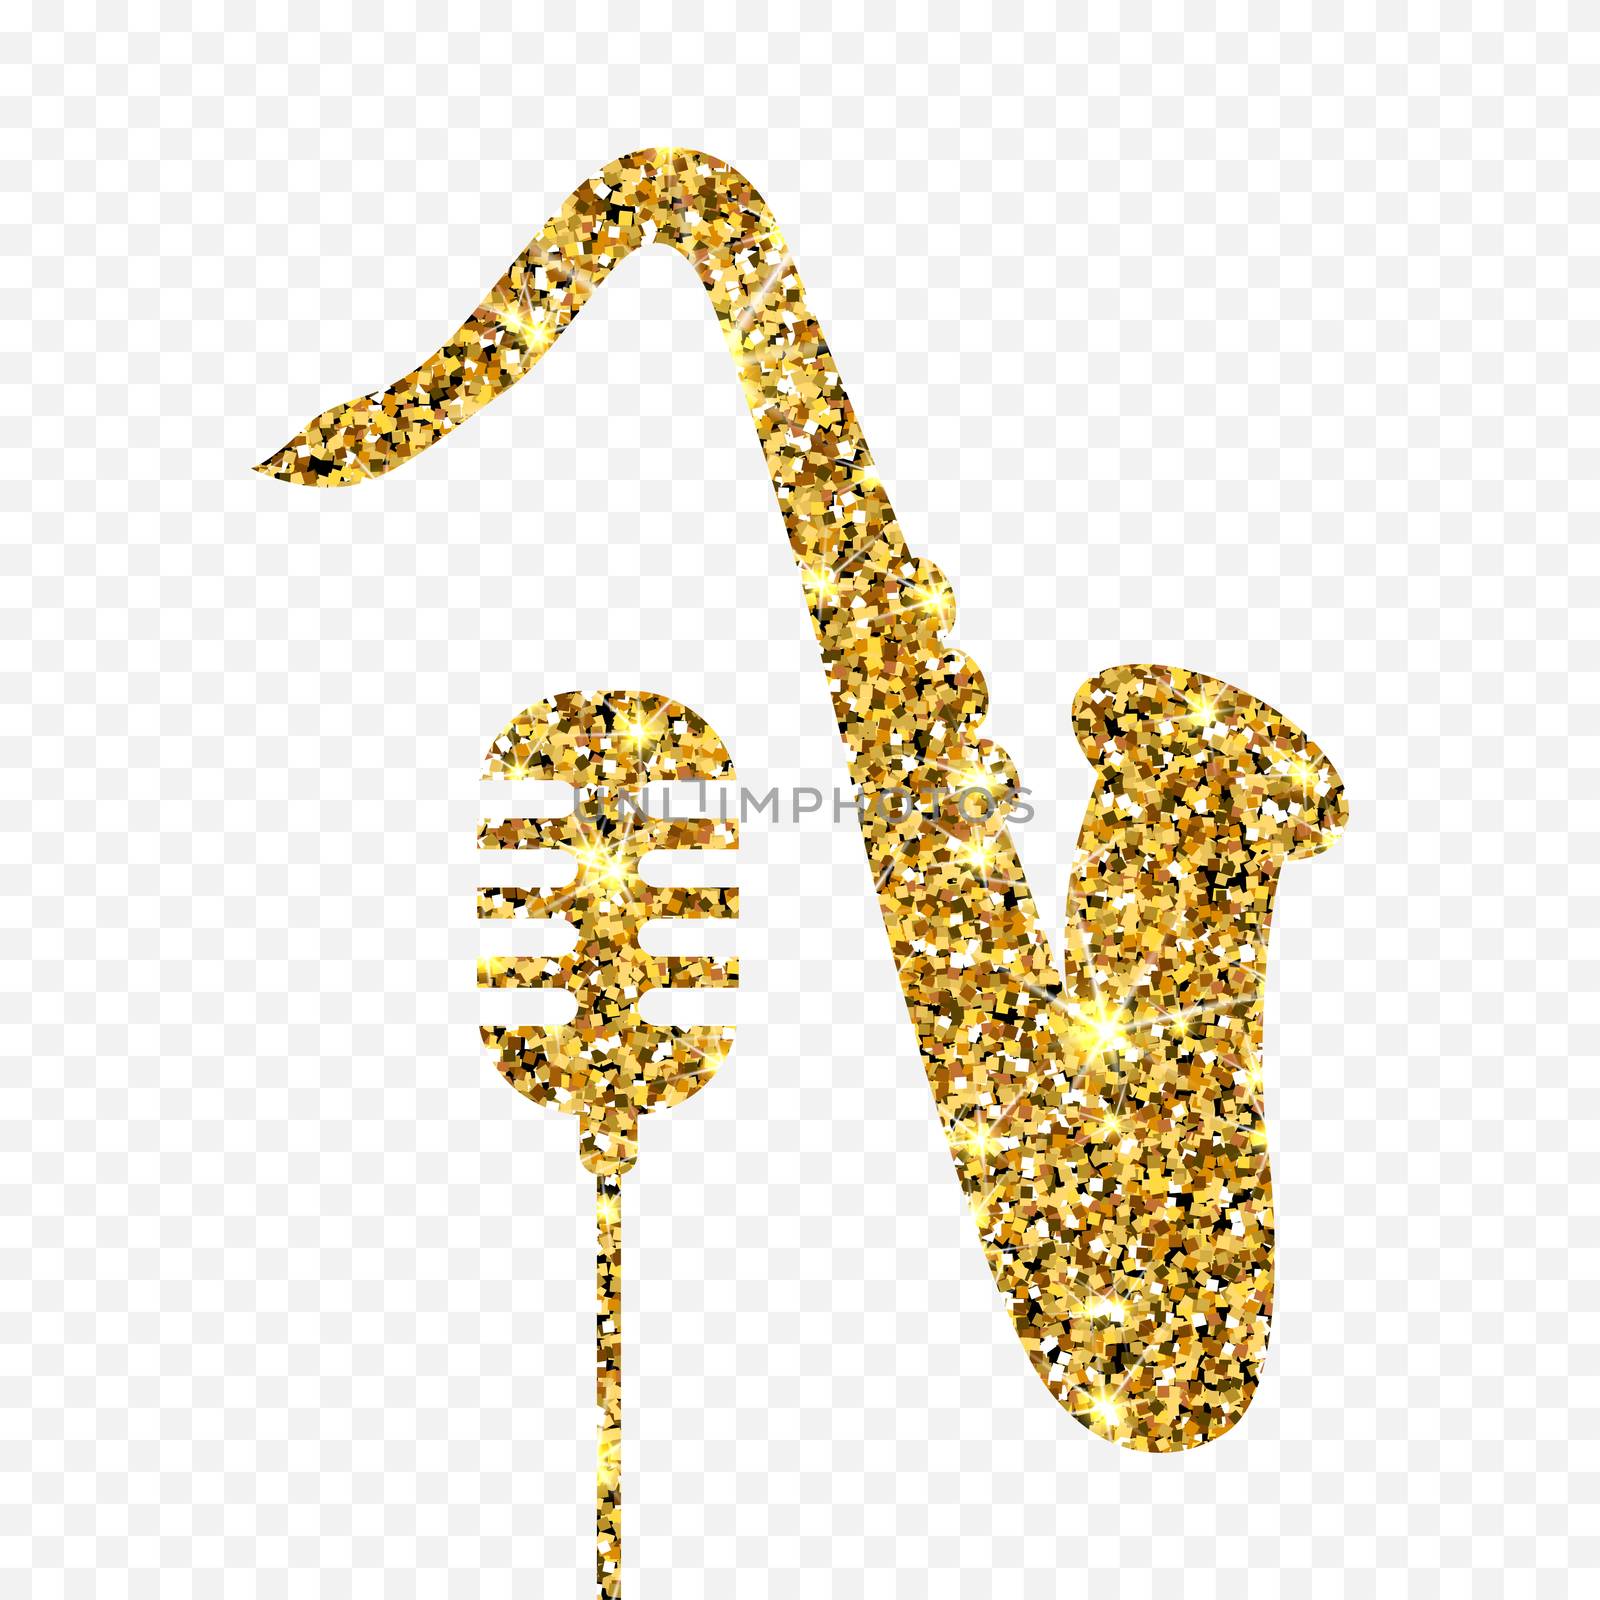 Gold glitter Old microphone and saxophone. Golden sparcle retro microphone and saxophone on transparent background. Amber particles gold confetti element. by Elena_Garder